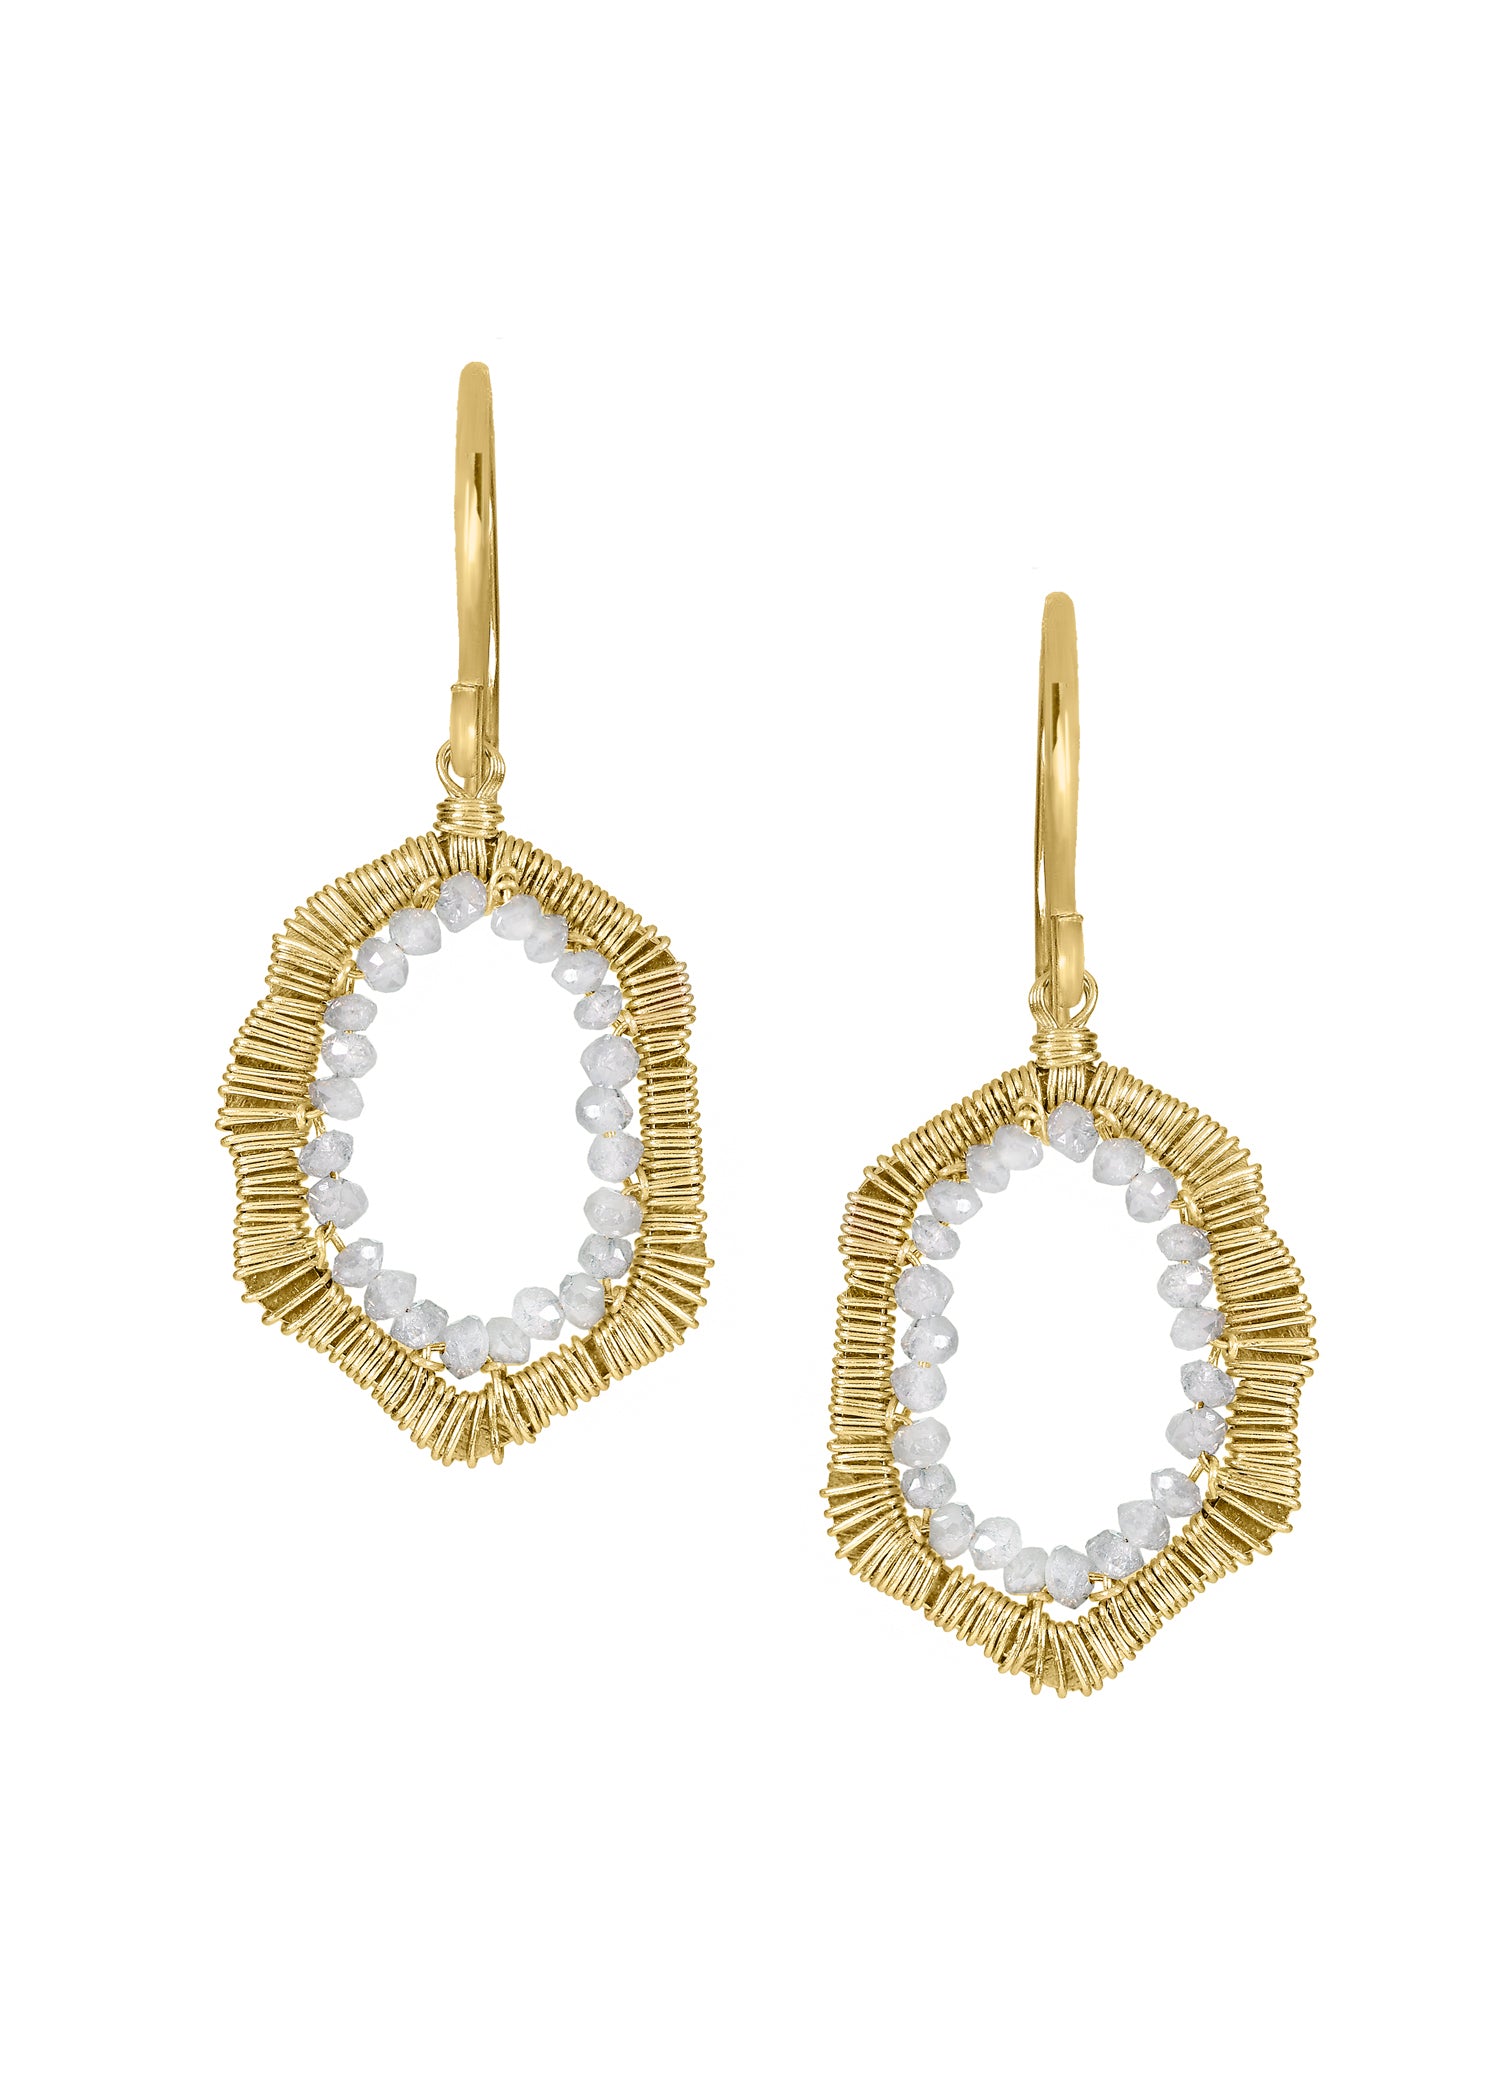 Gray diamonds 14k gold Earrings measure 1-5/8" in length (including the ear wires) and 7/8" in width at the widest point Handmade in our Los Angeles studio